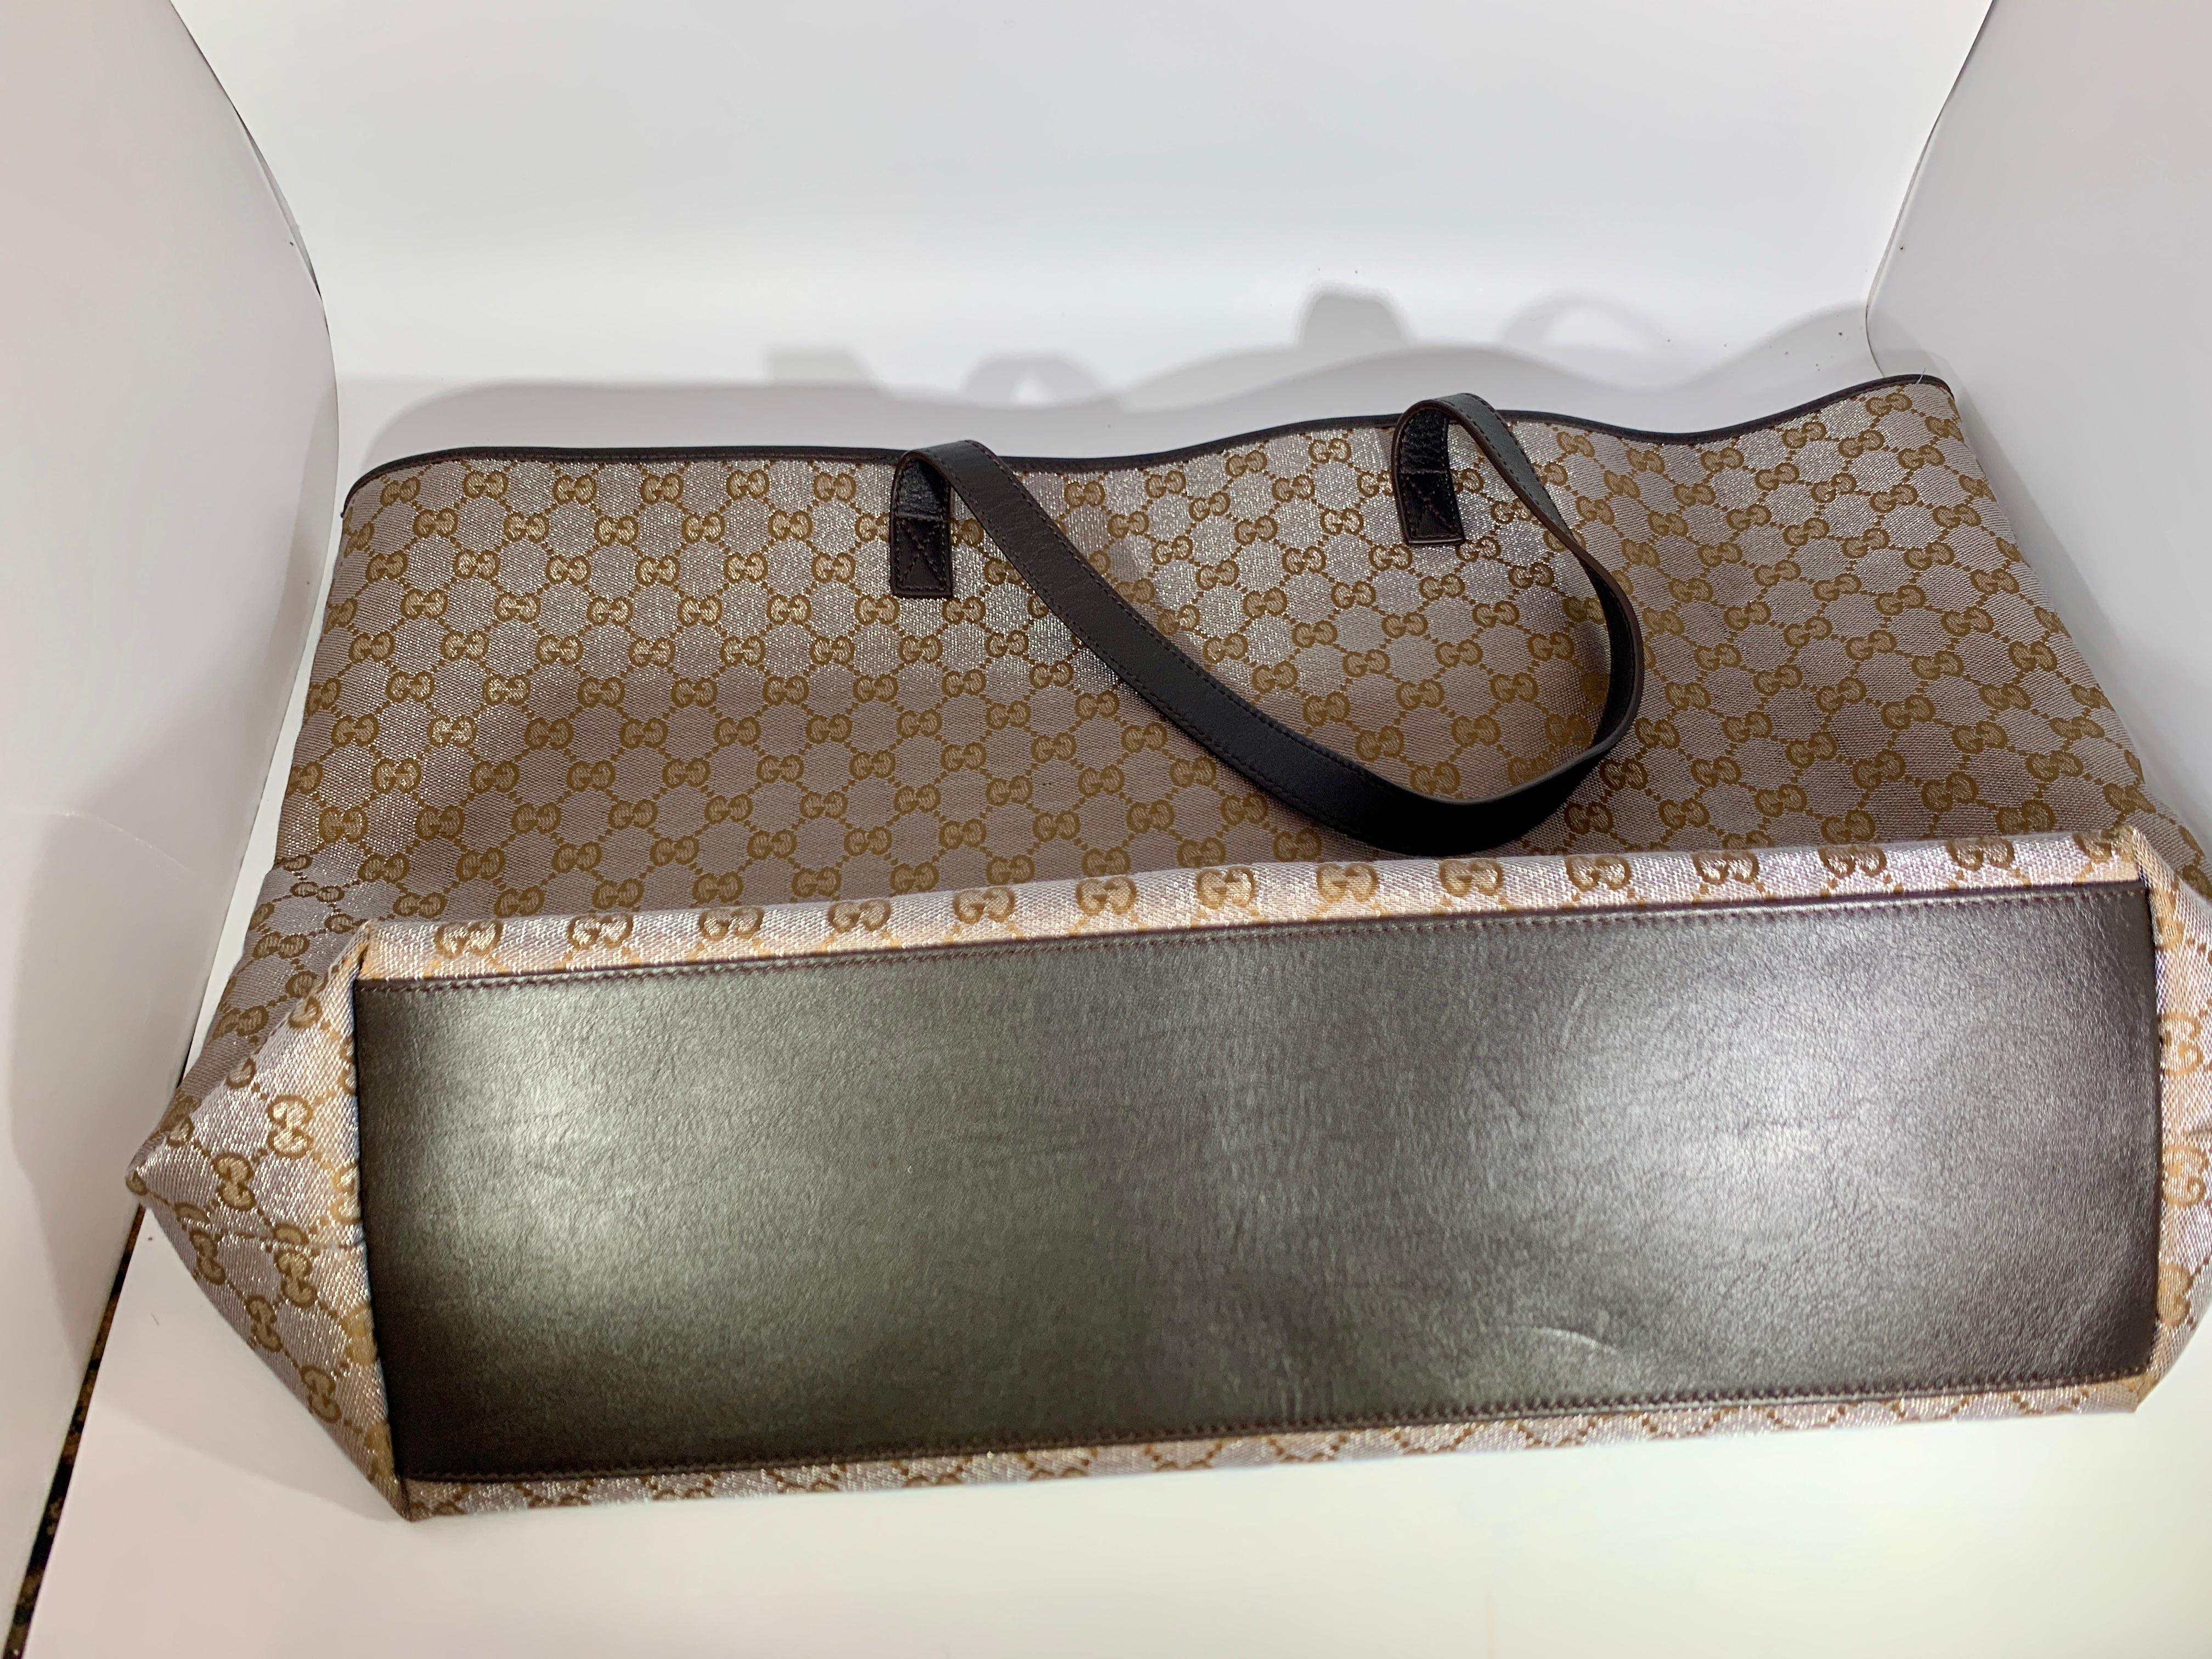 Gucci Plus Vintage GG Monogram Canvas Large Tote Shoulder Bag Silver Like New
This is an Authentic Vintage Gucci Plus large Tote
The color silver and brown , its some what dressy as there is a shine and glitter in the silver color 
Most beautiful